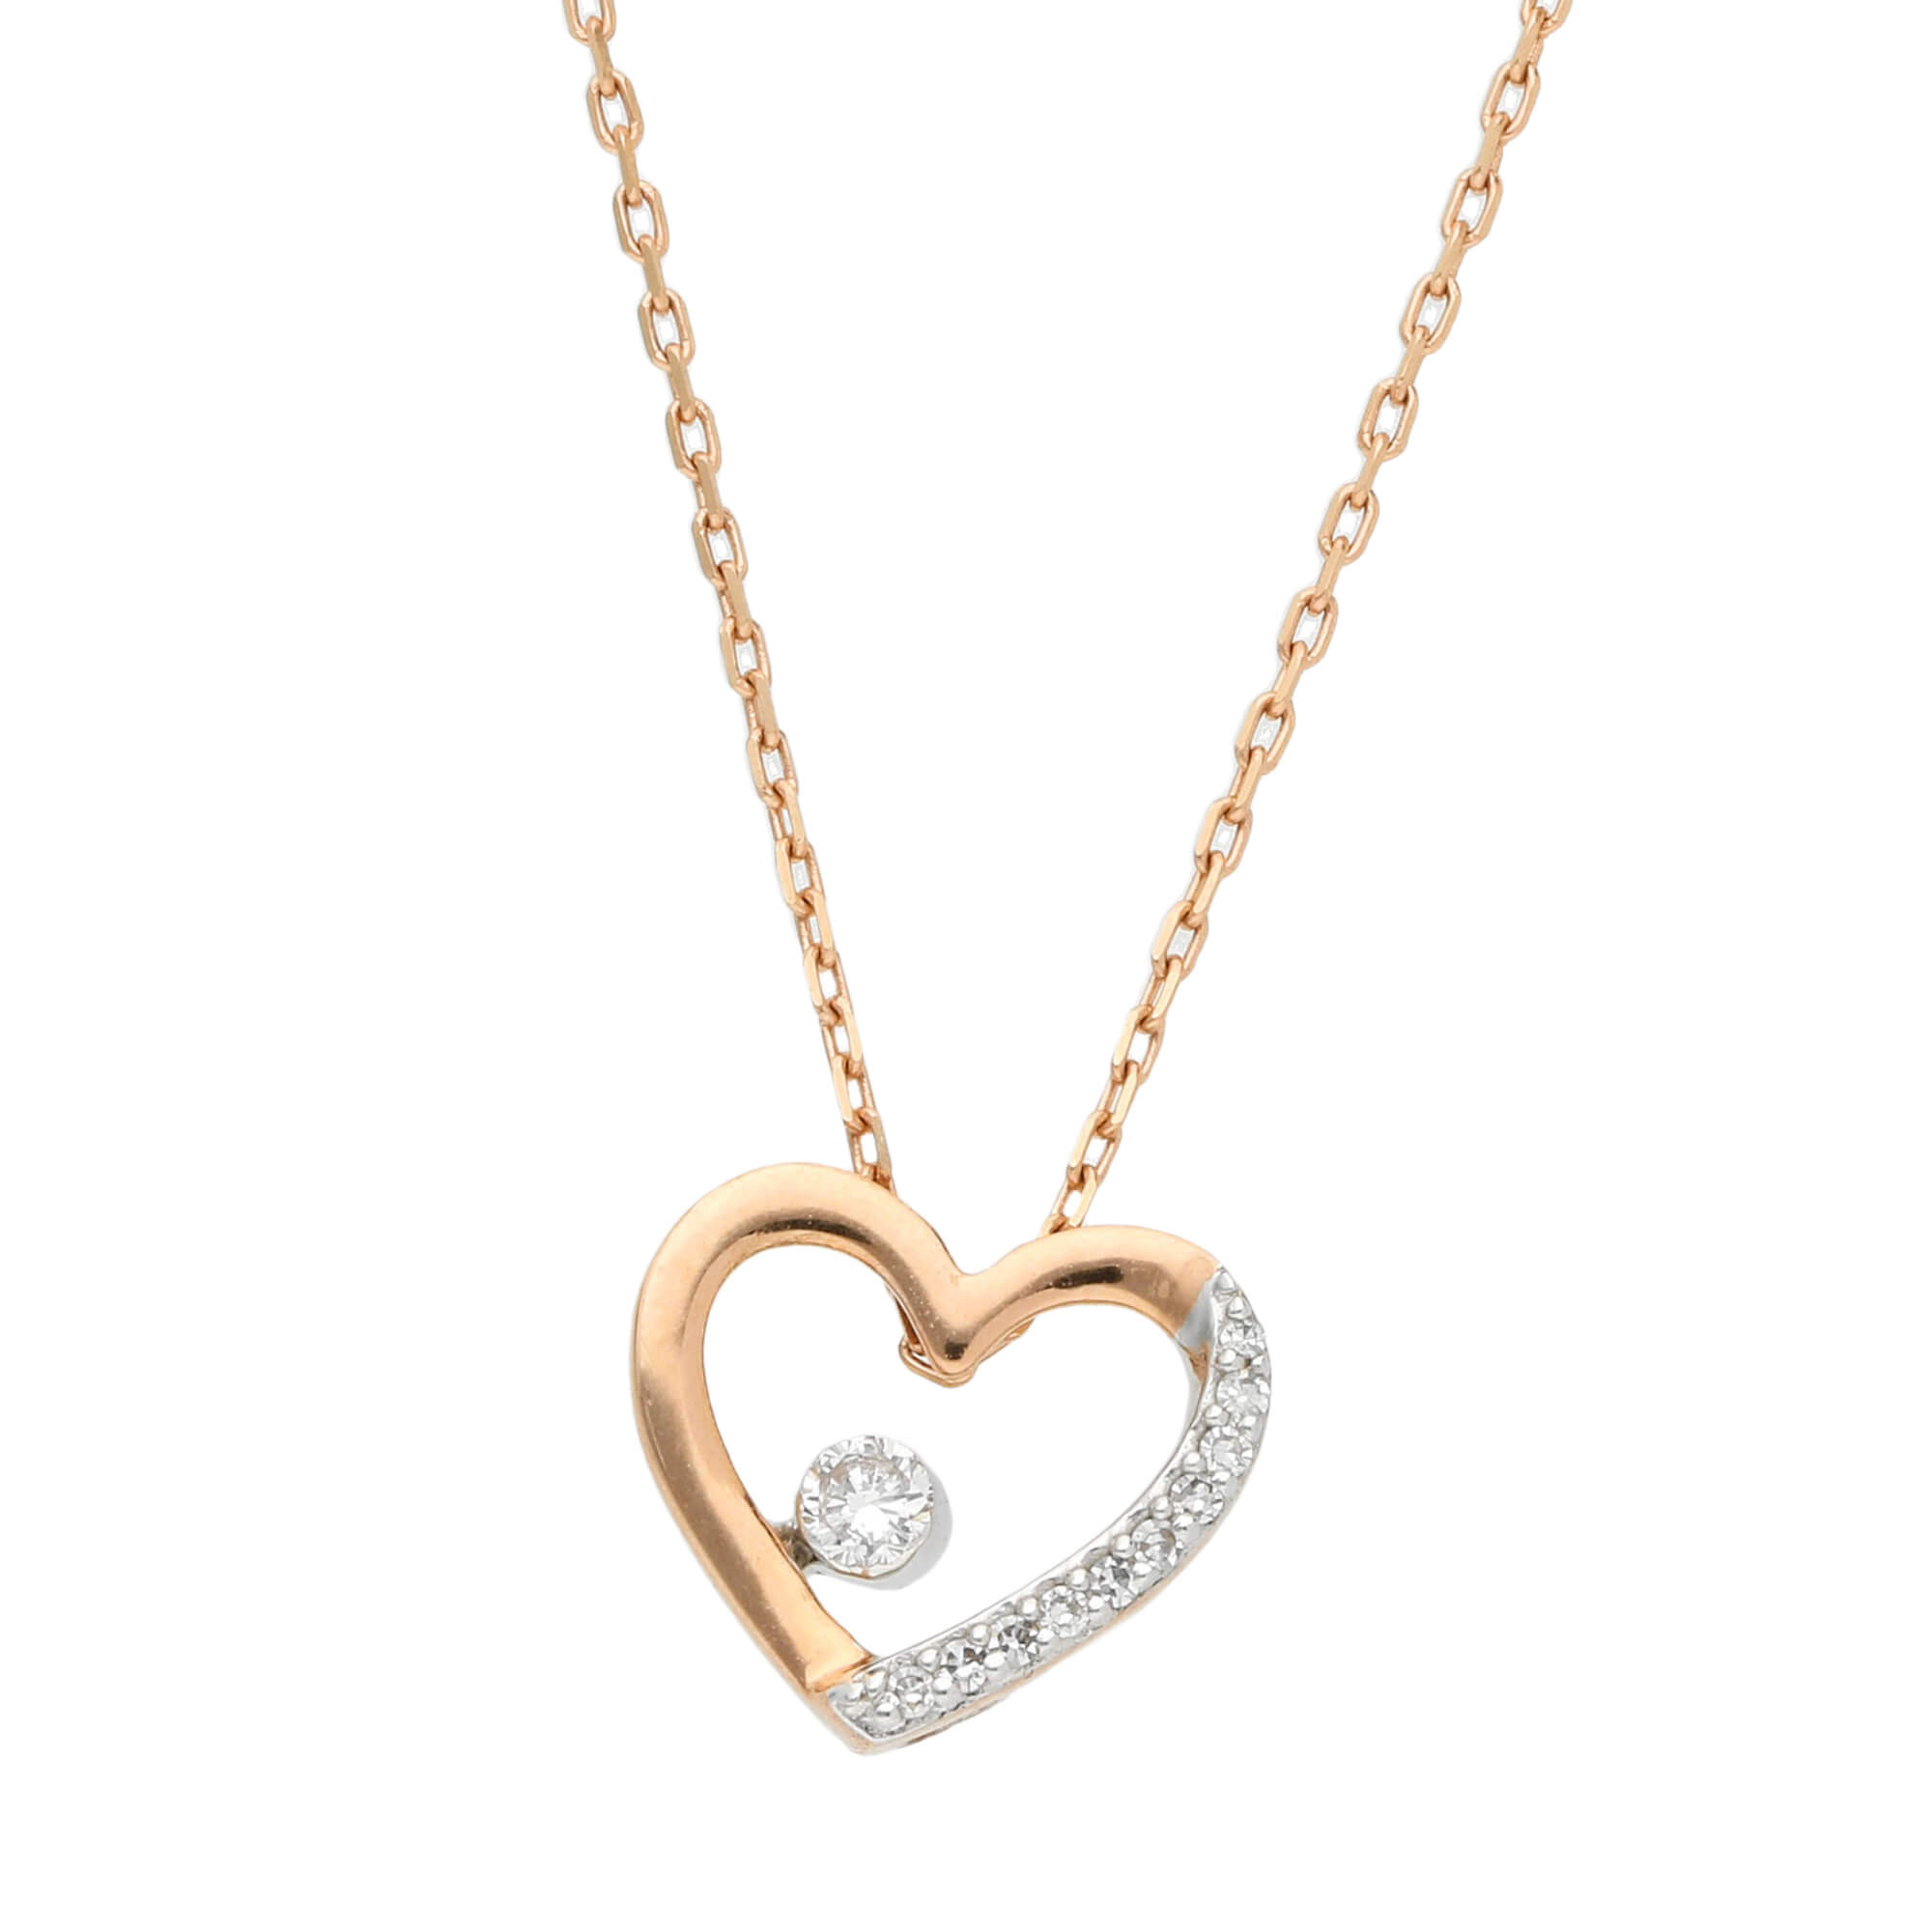 9ct Rose Gold Diamond Heart Pendant Necklace | Buy Online | Free